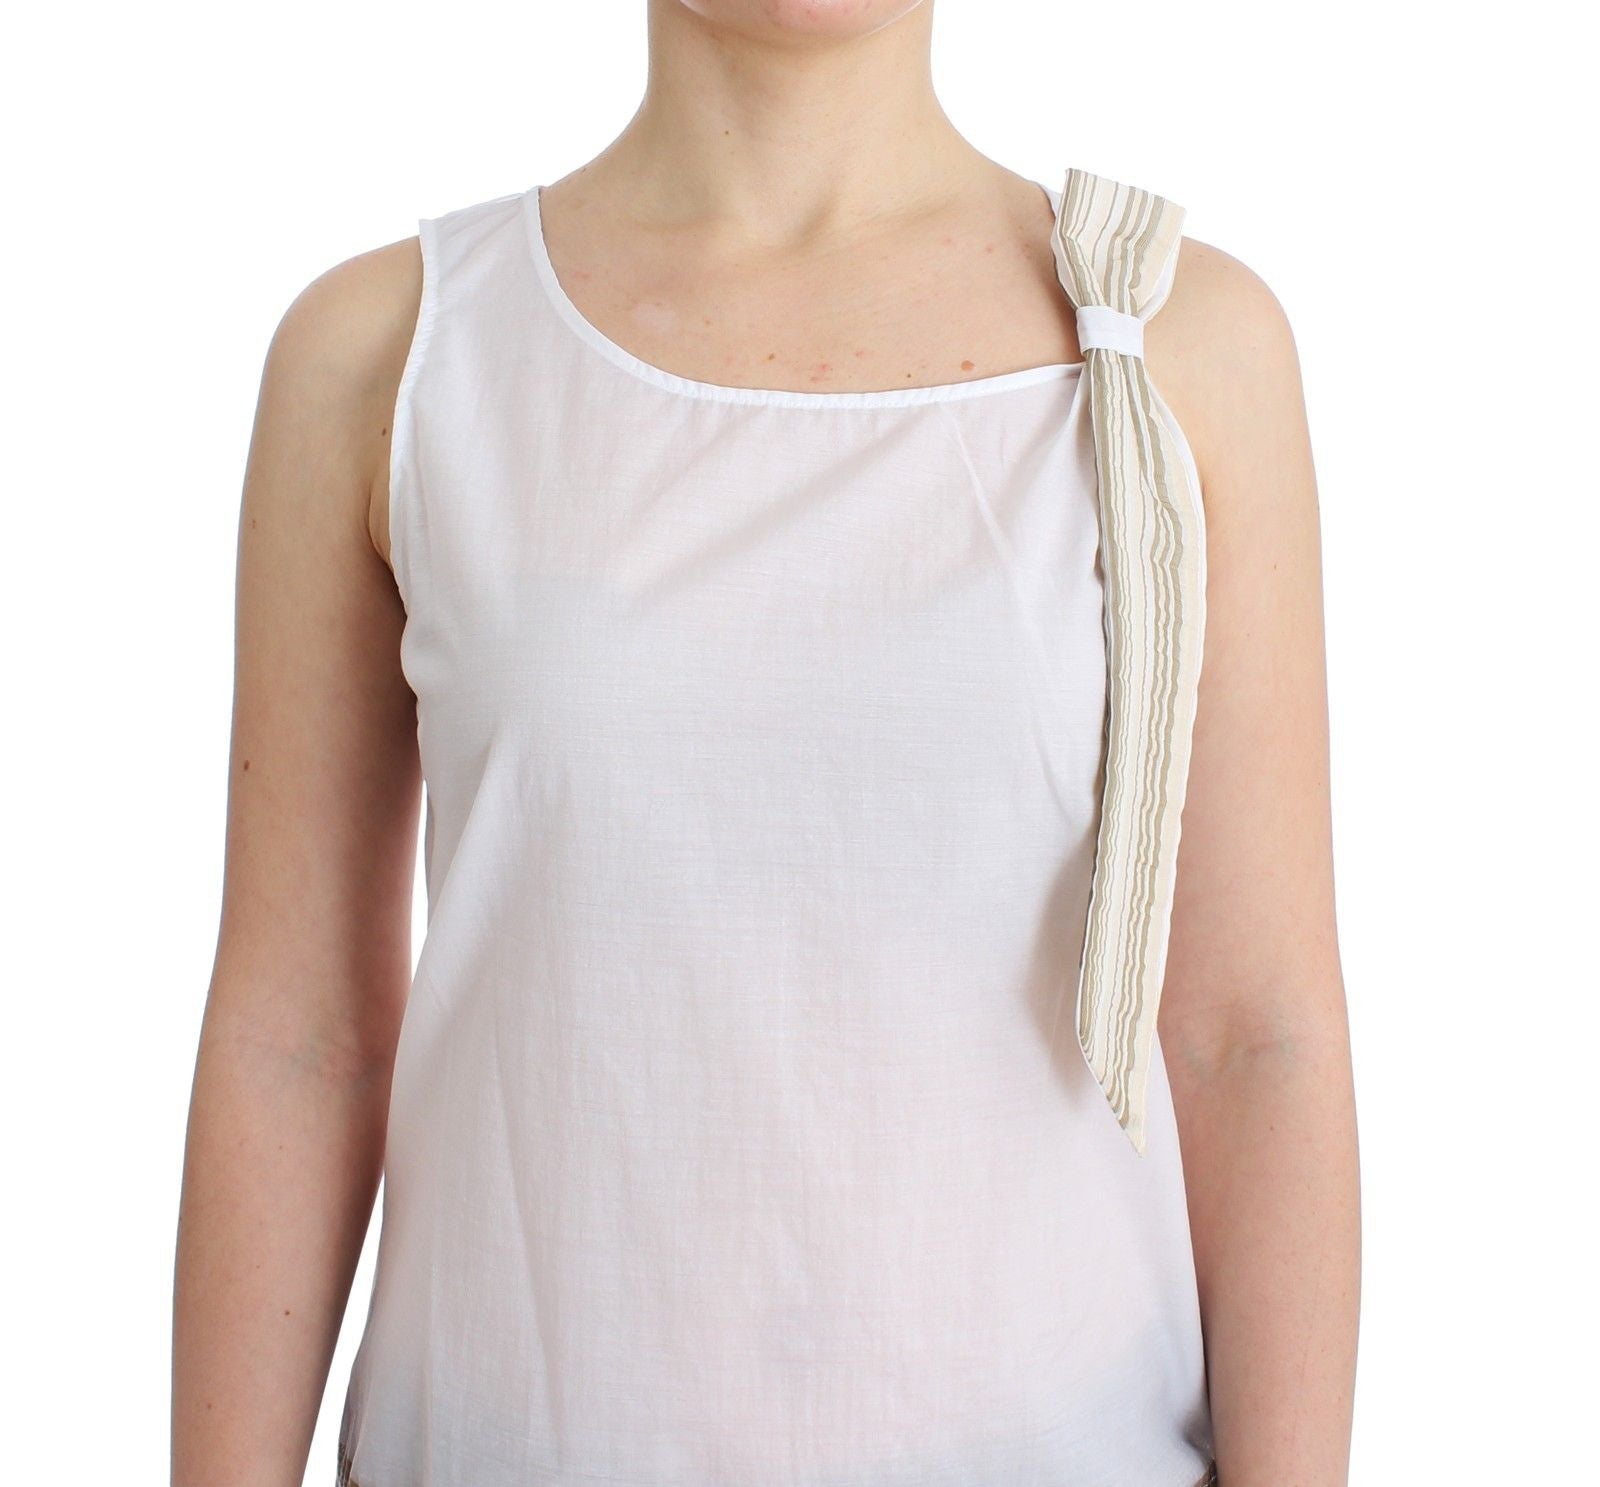 Buy White Top Blouse Tank Shirt Sleeveless by Ermanno Scervino